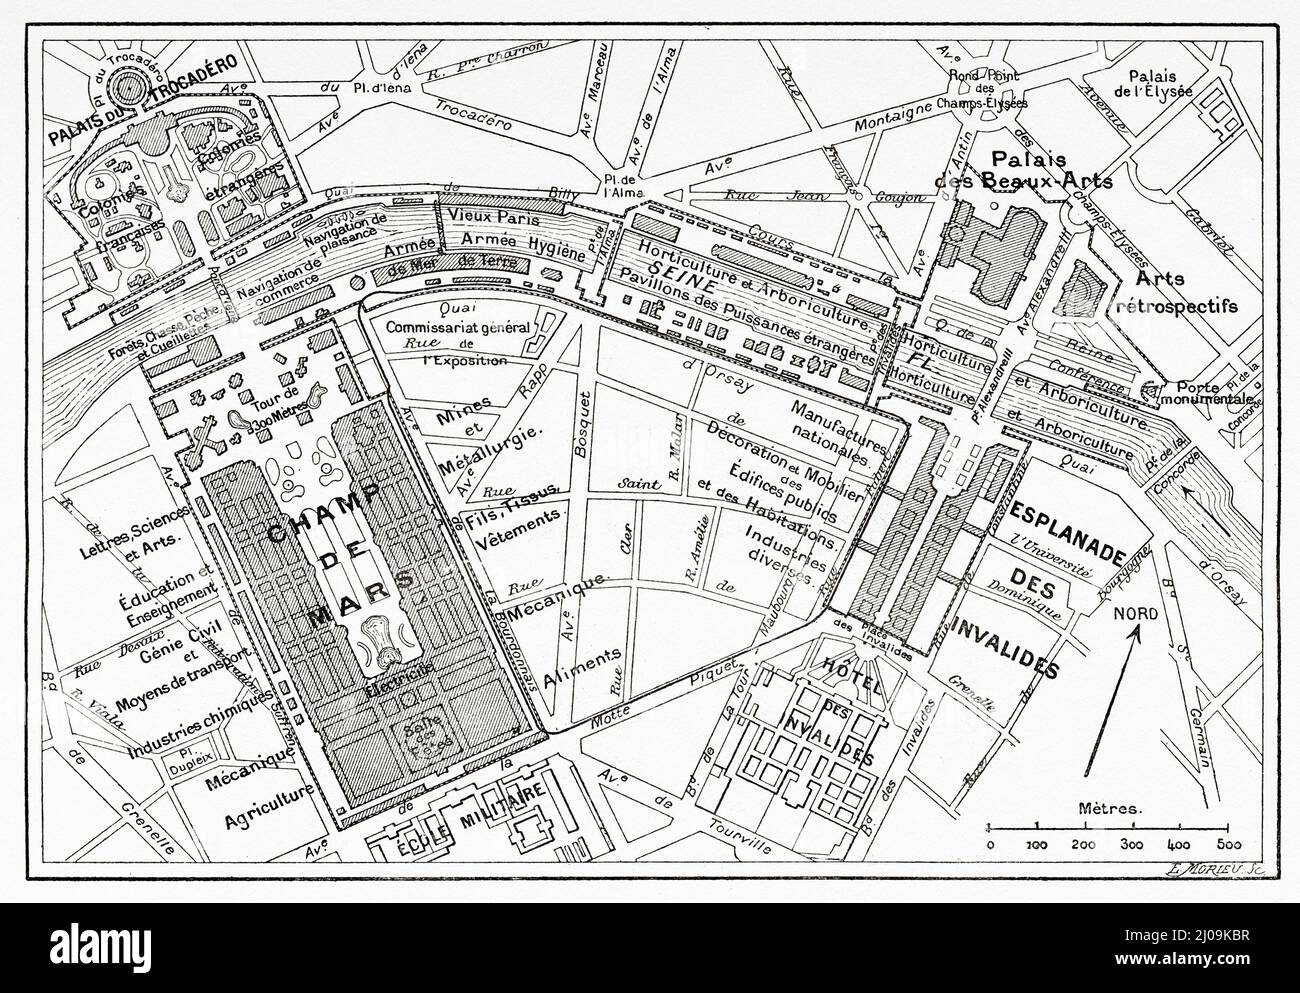 Map of the Universal Exhibition in Paris, 1900. France, Europe. Old 19th century engraved illustration from La Nature 1899 Stock Photo